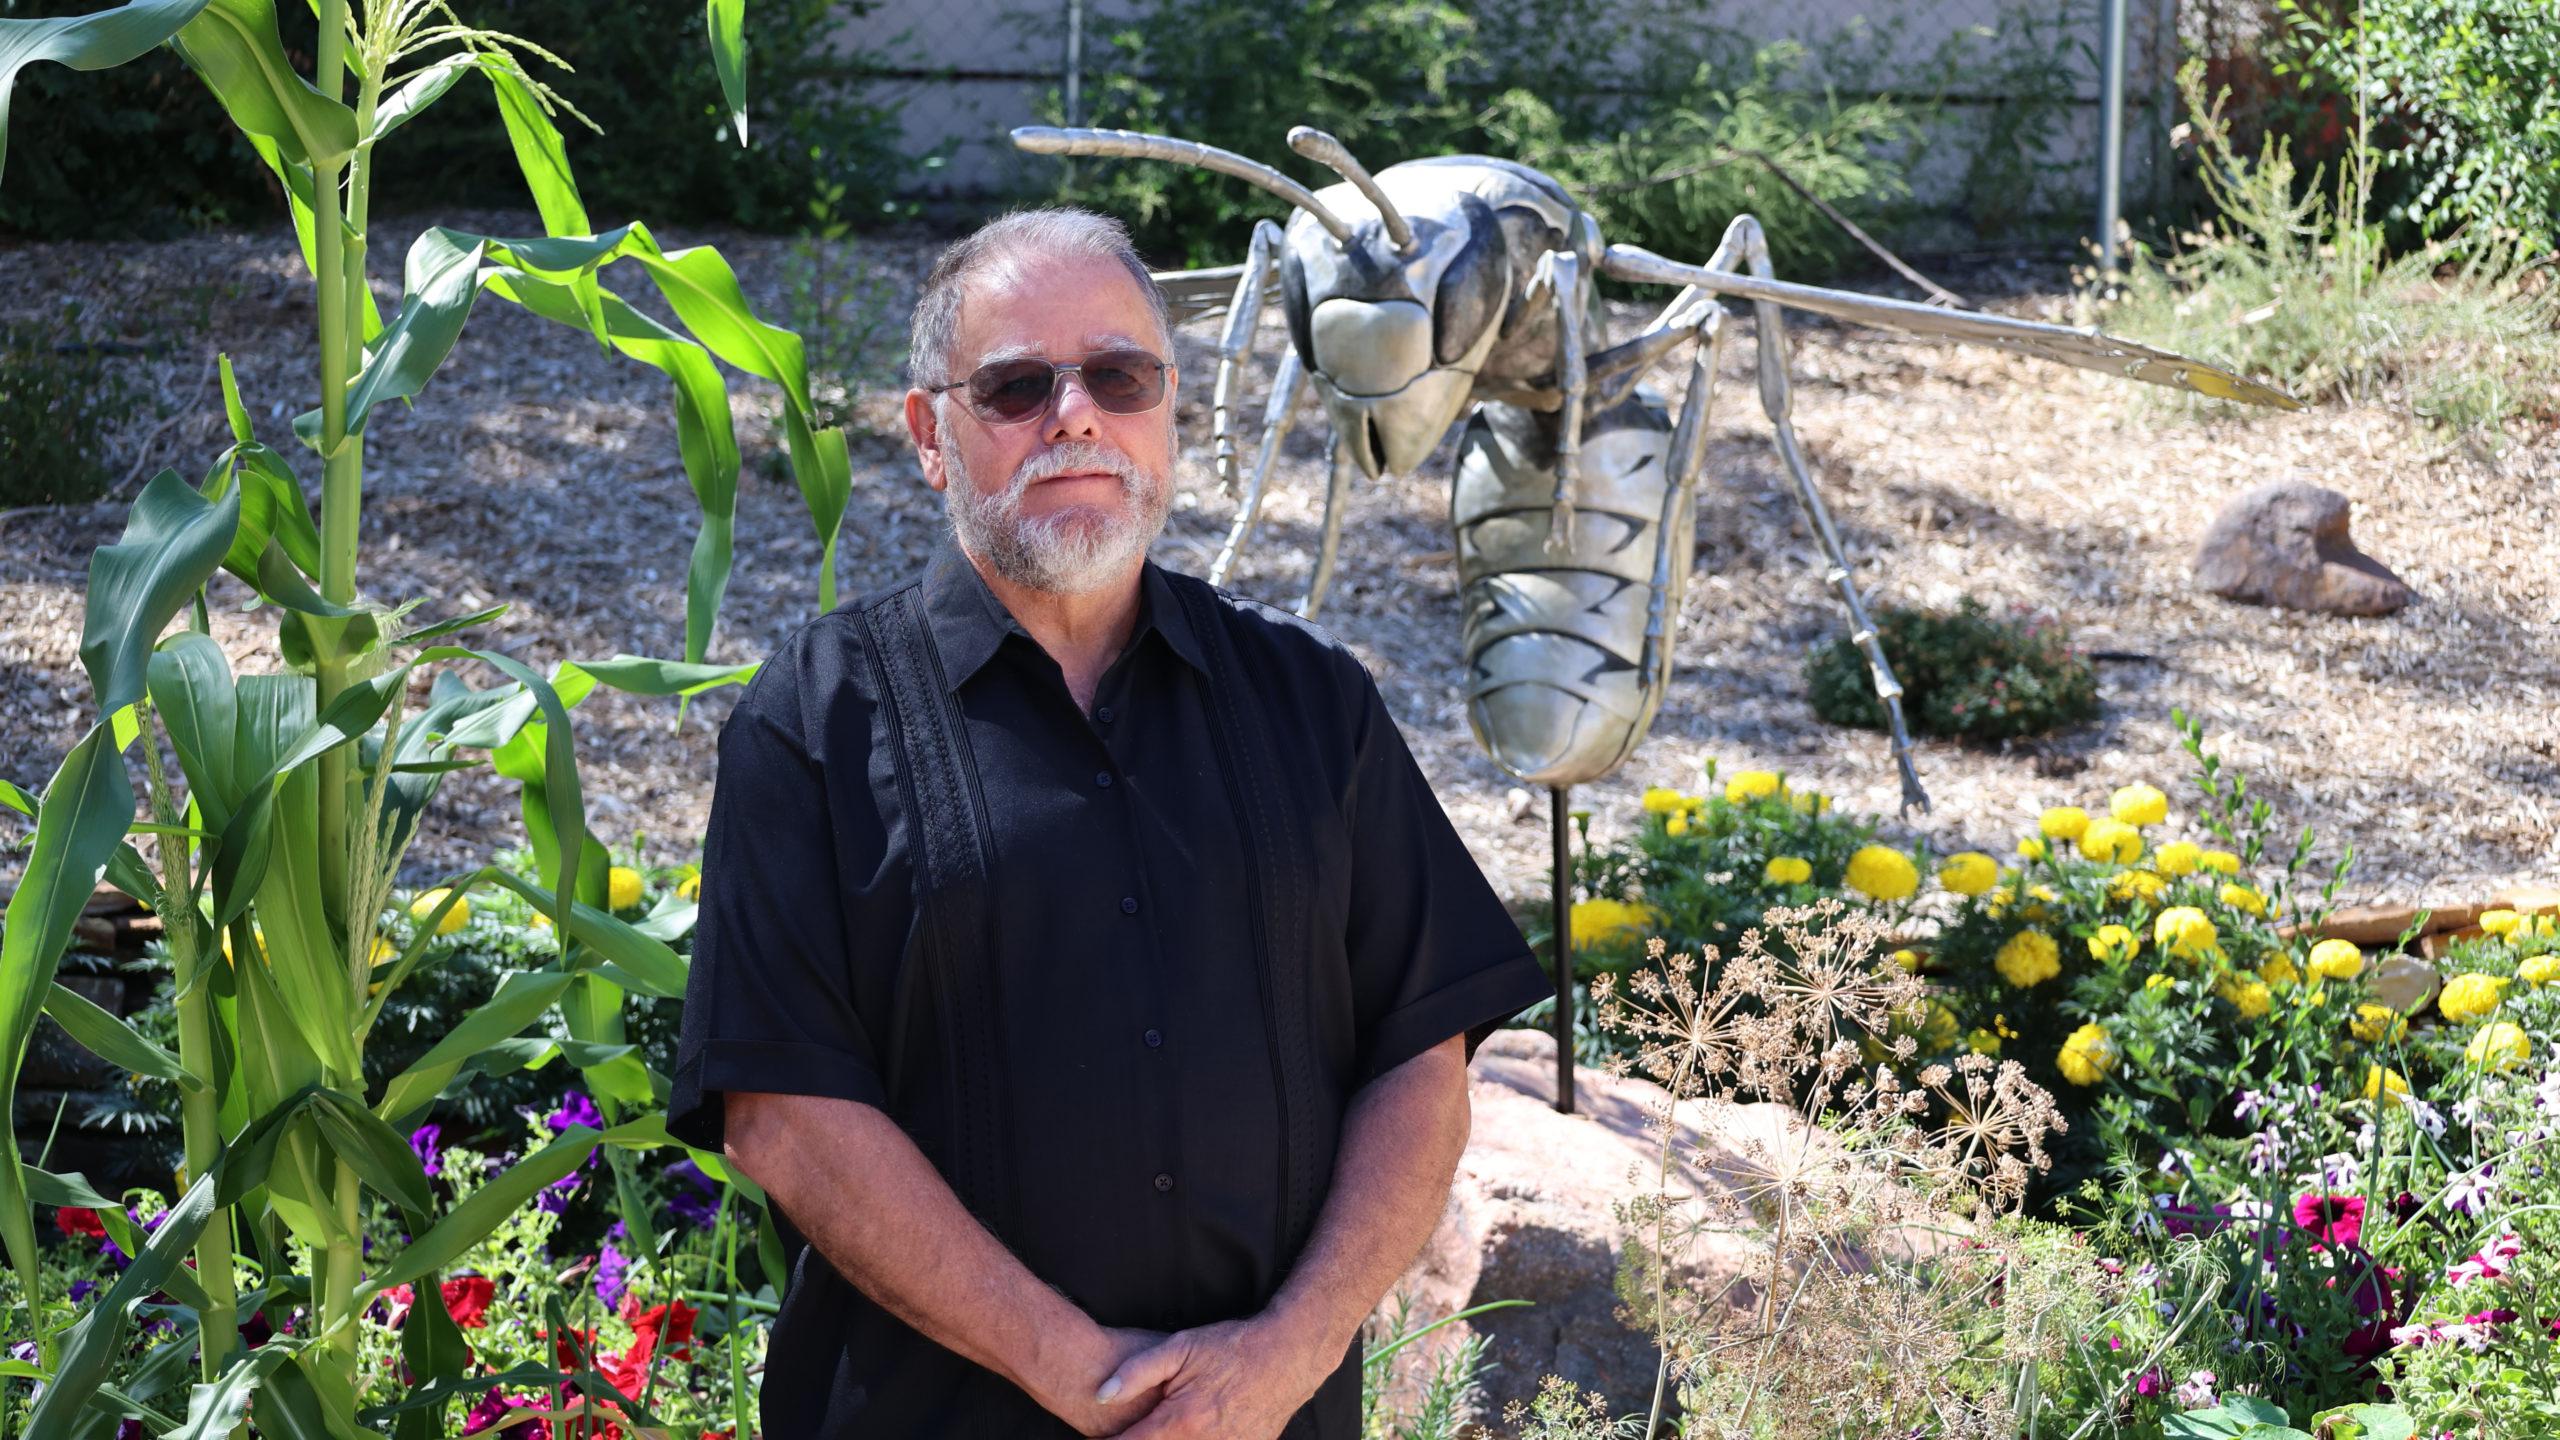 John Montaña standing in front of a piece of artwork, a metal sculpture of a wasp